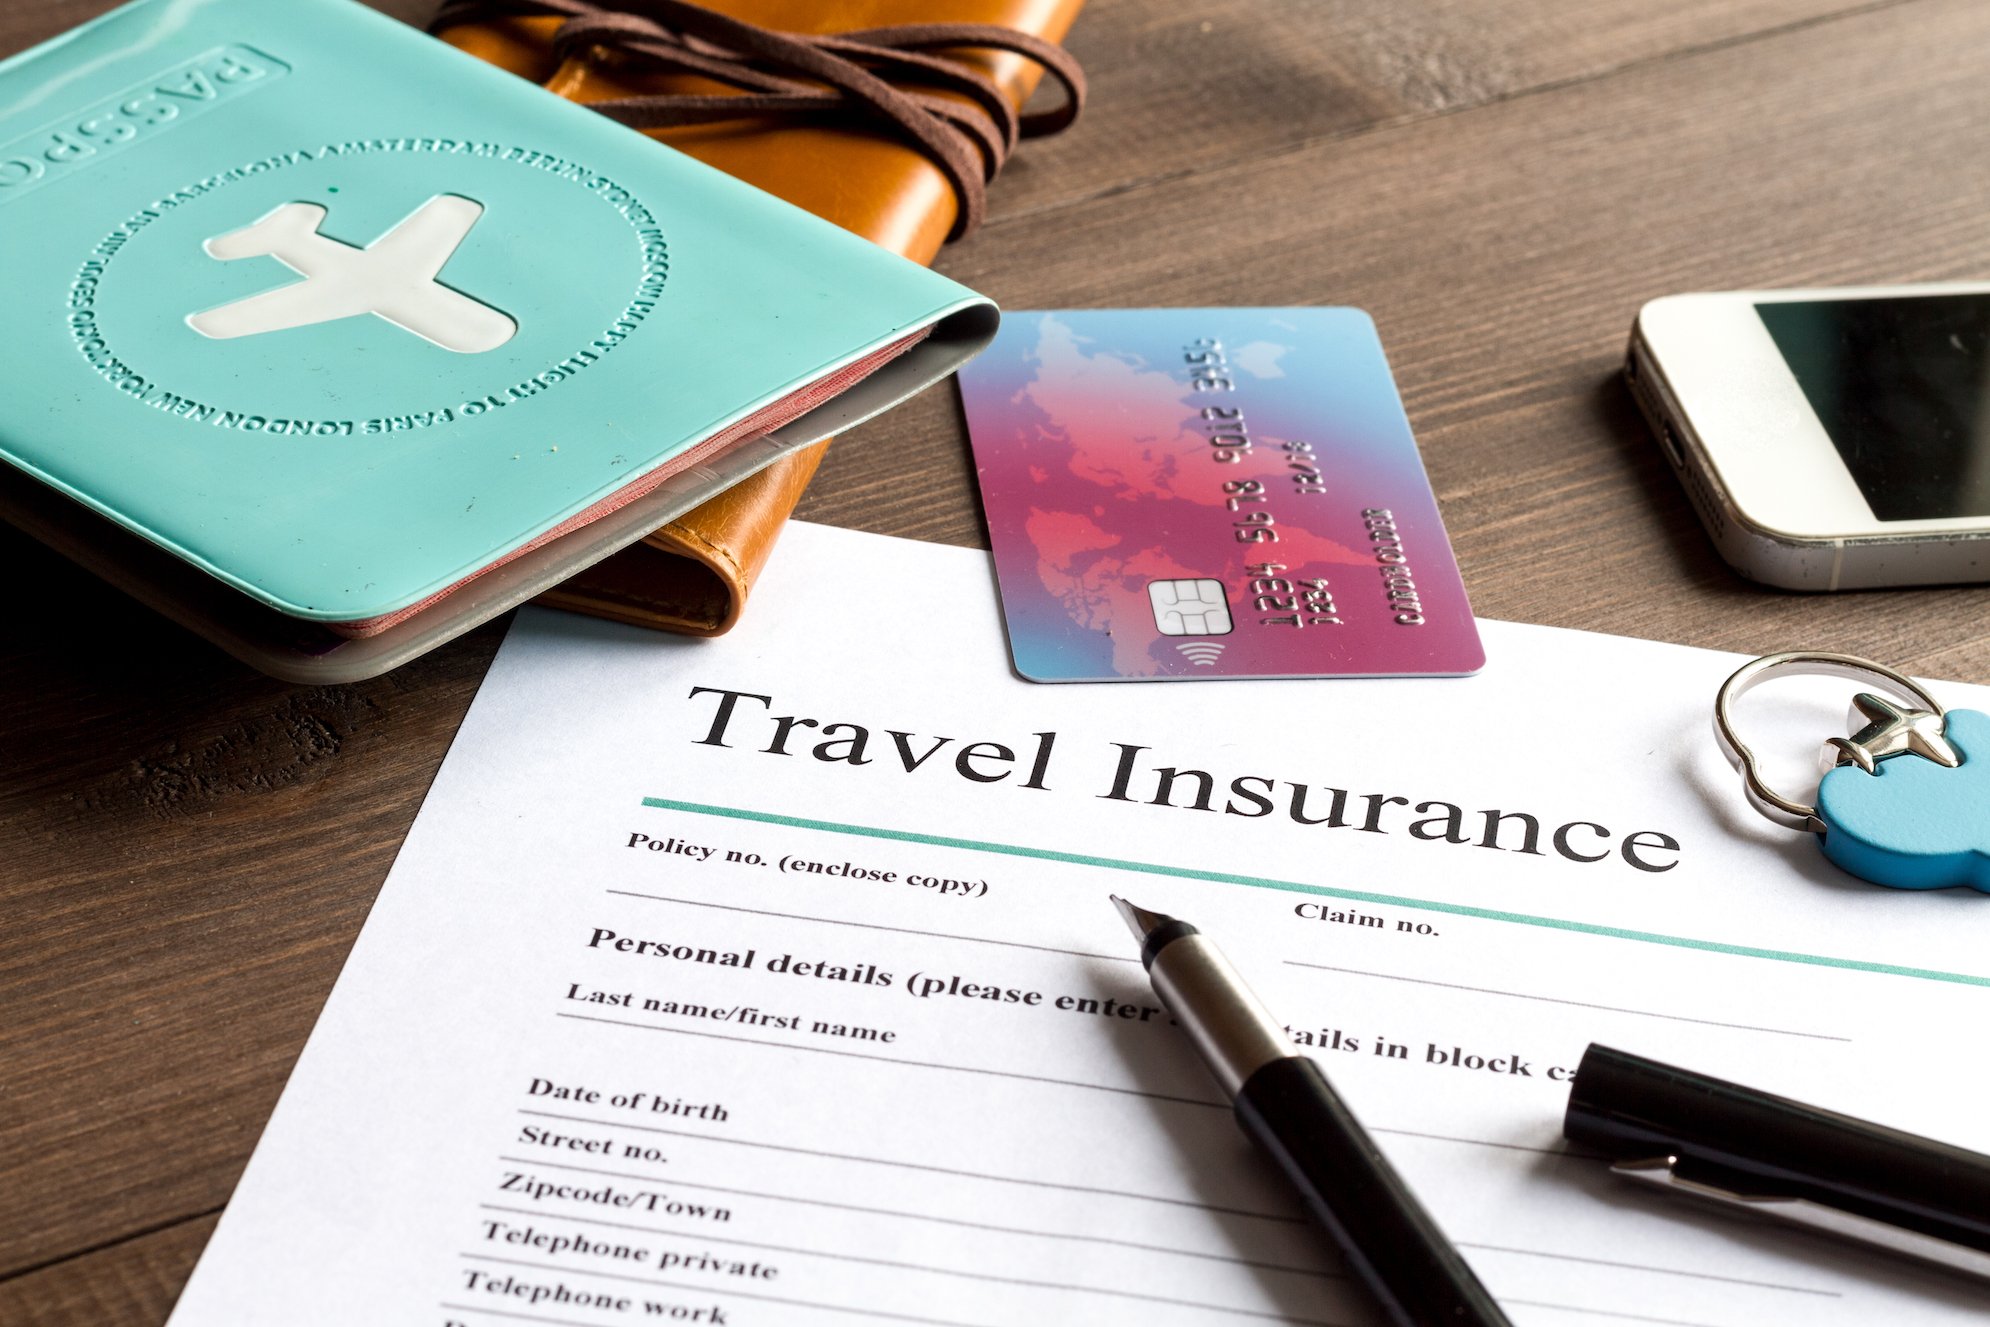 Travel Insurance, all you need to know